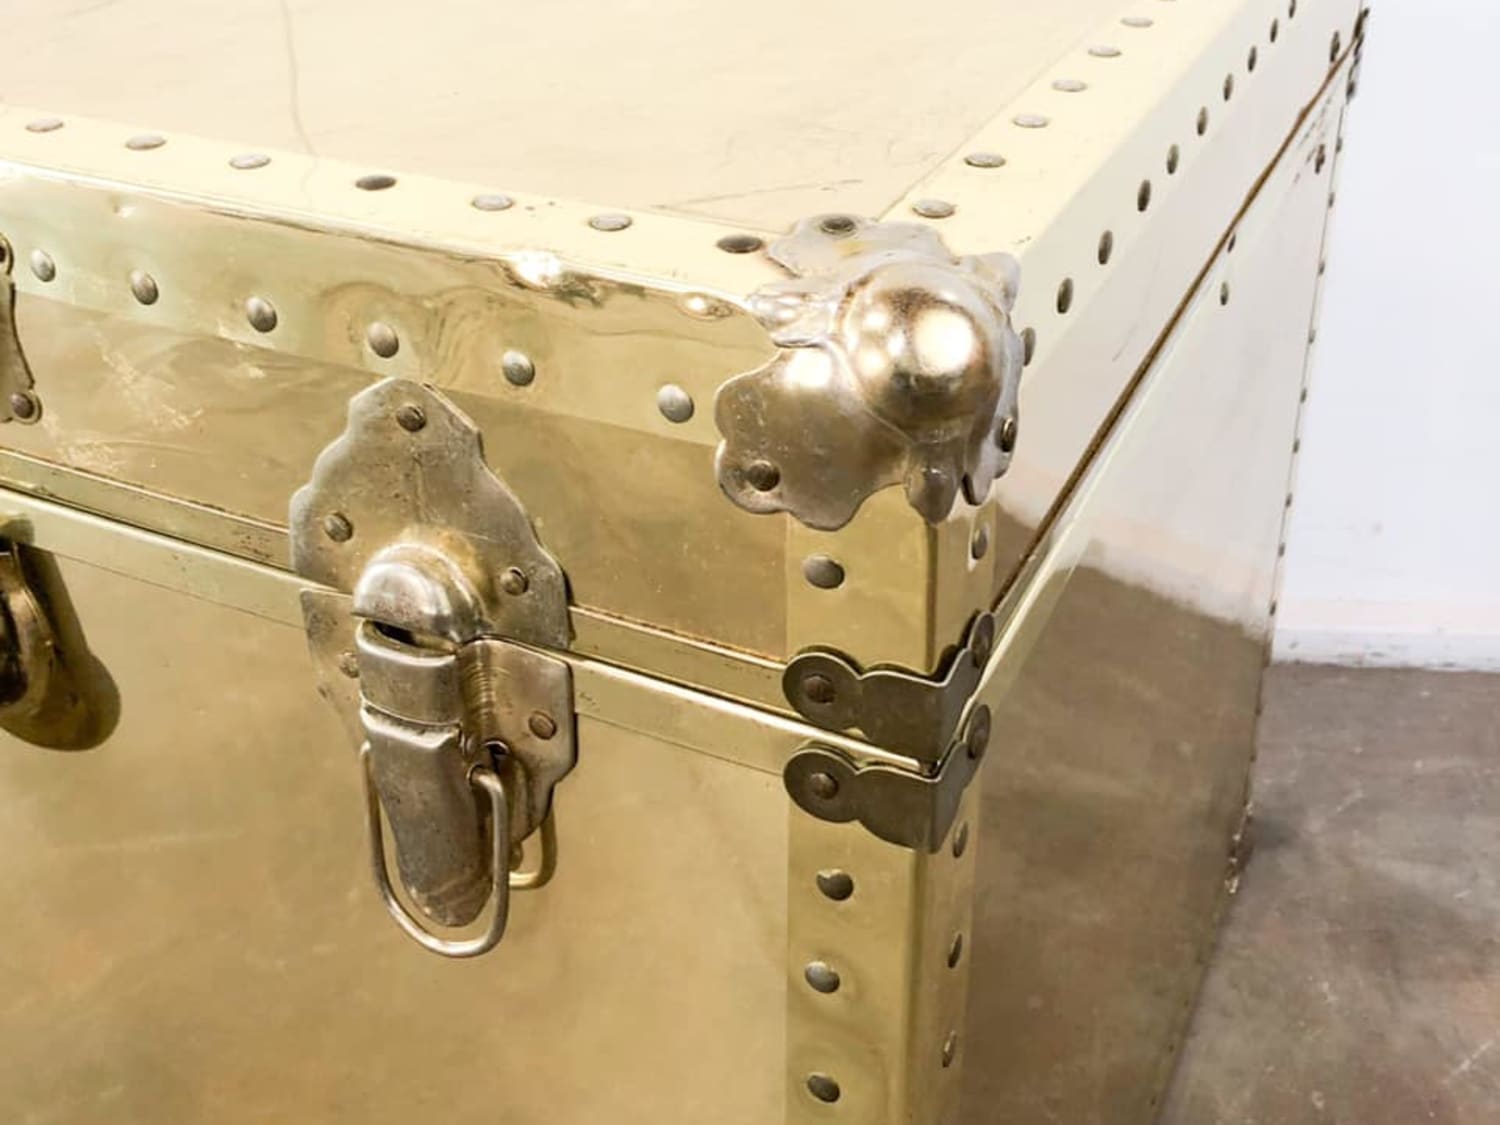 Steel and Brass Steamer Trunk - Great Finds & Design